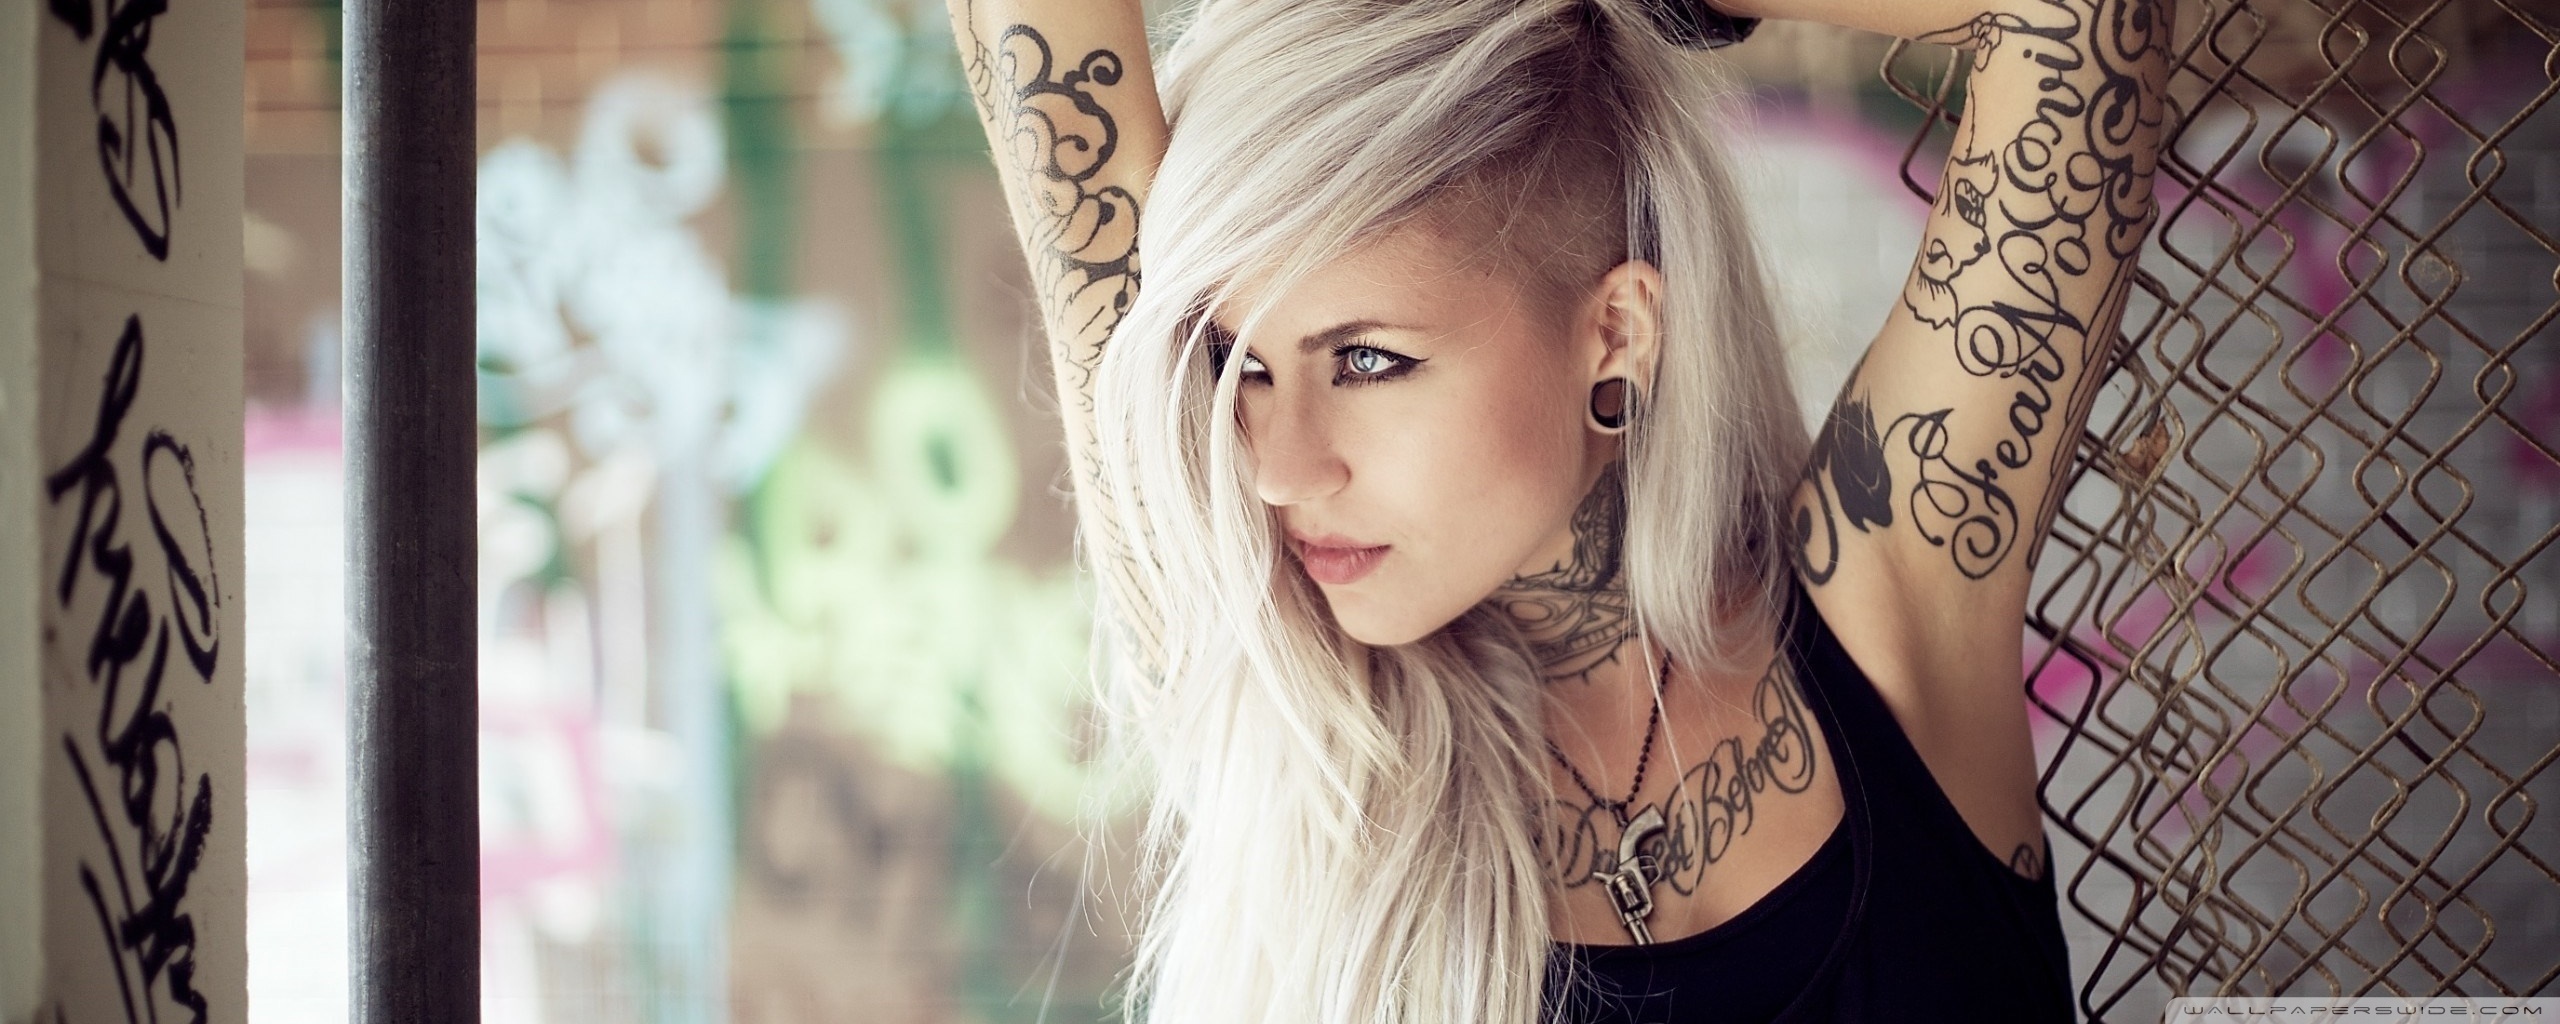 Rate This Wallpaper - Blonde Girl With Tattoo , HD Wallpaper & Backgrounds